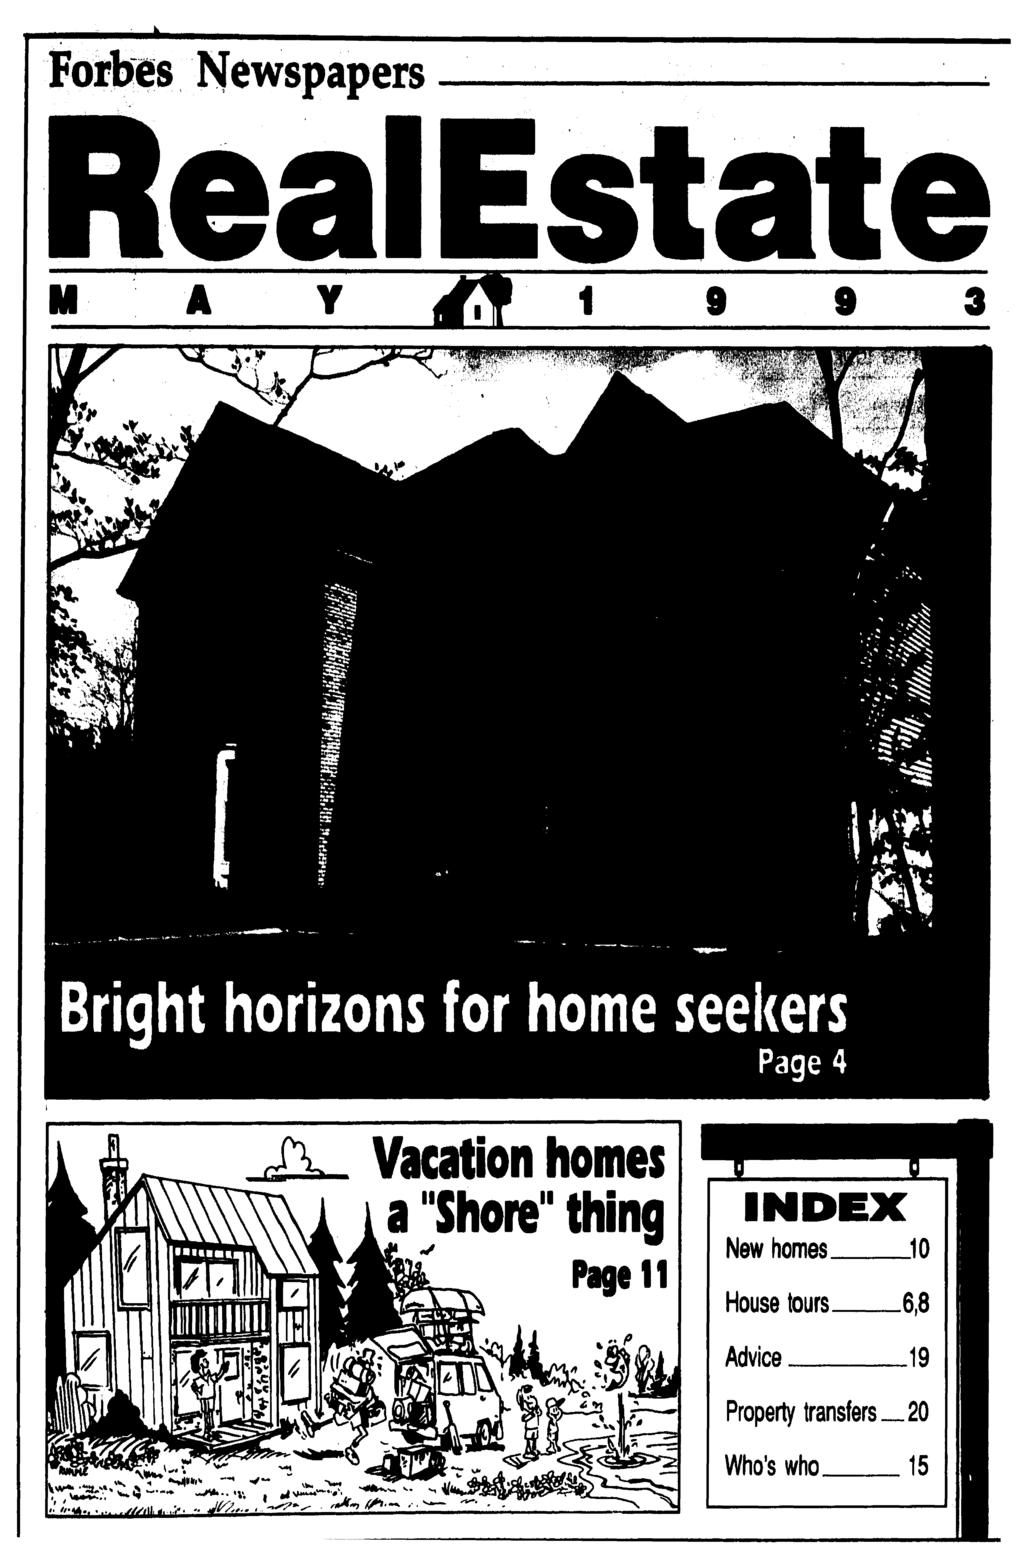 Vacation homes a "Shore" thing Page 11 INDEX New homes 10